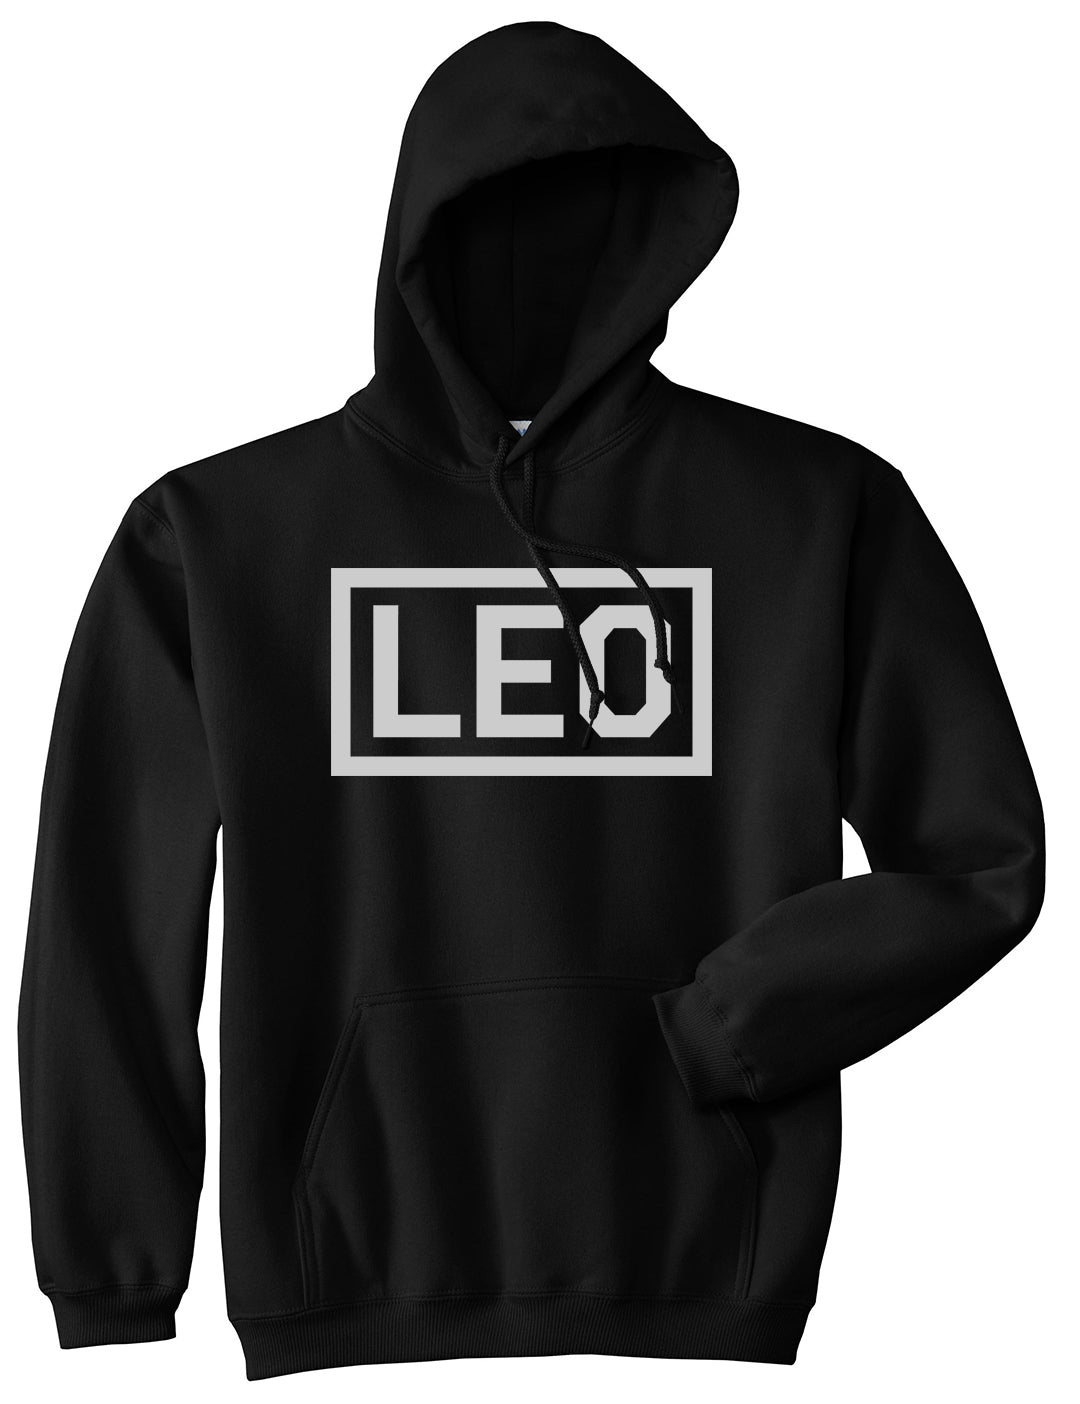 Leo Horoscope Sign Mens Black Pullover Hoodie by KINGS OF NY